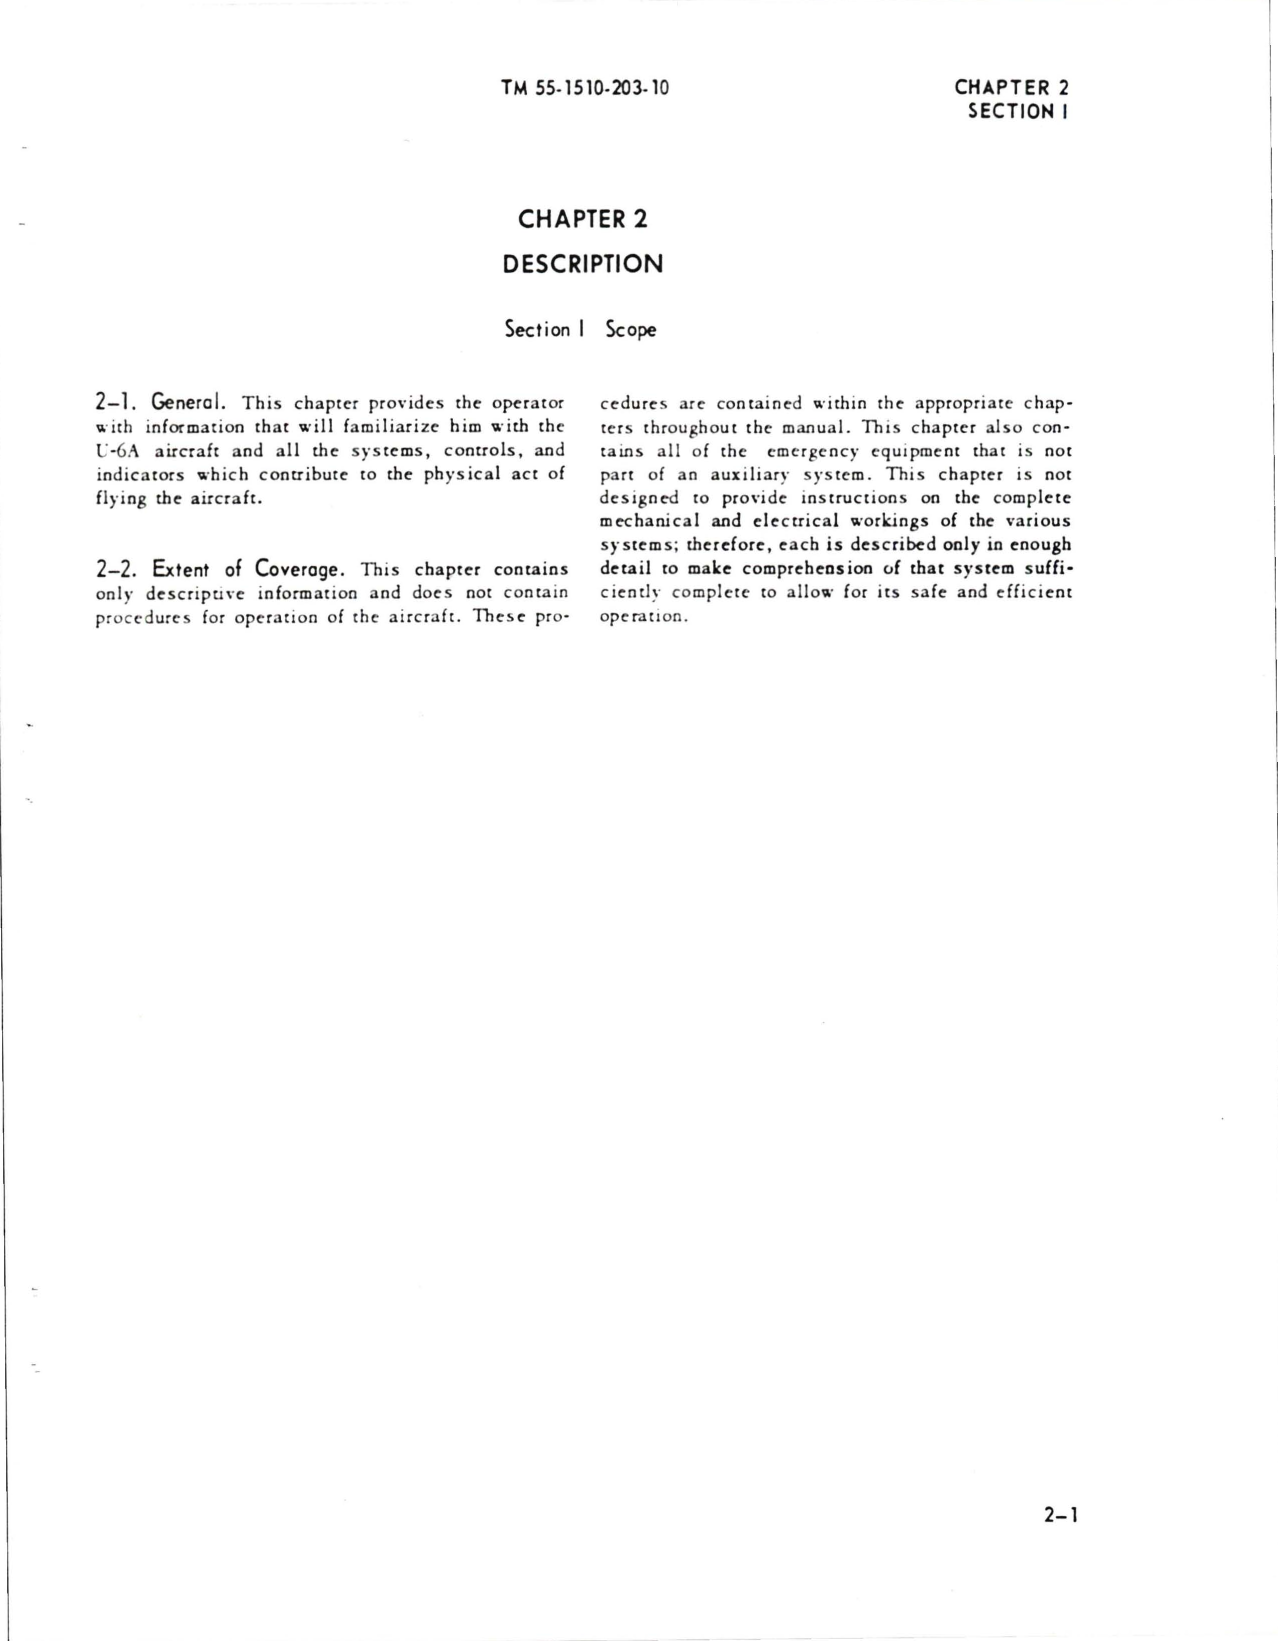 Sample page 7 from AirCorps Library document: Operator's Manual for U-6A